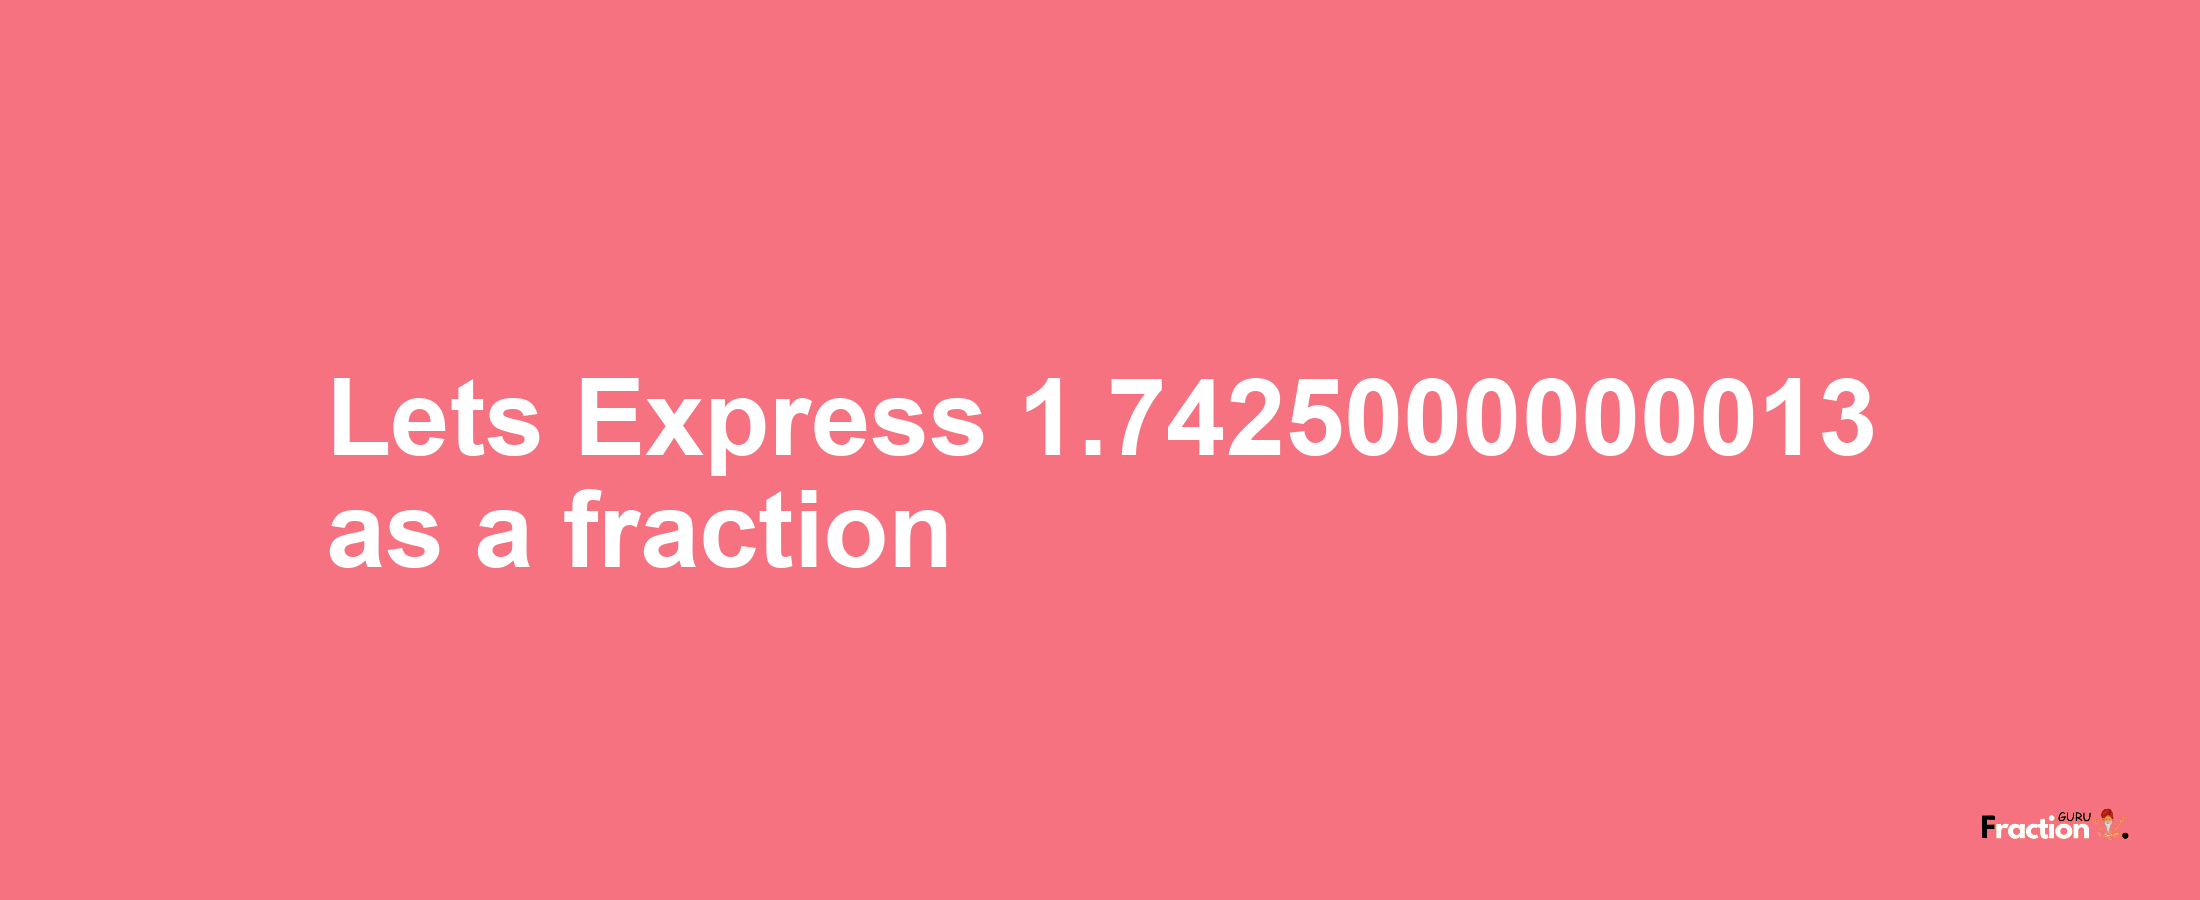 Lets Express 1.7425000000013 as afraction